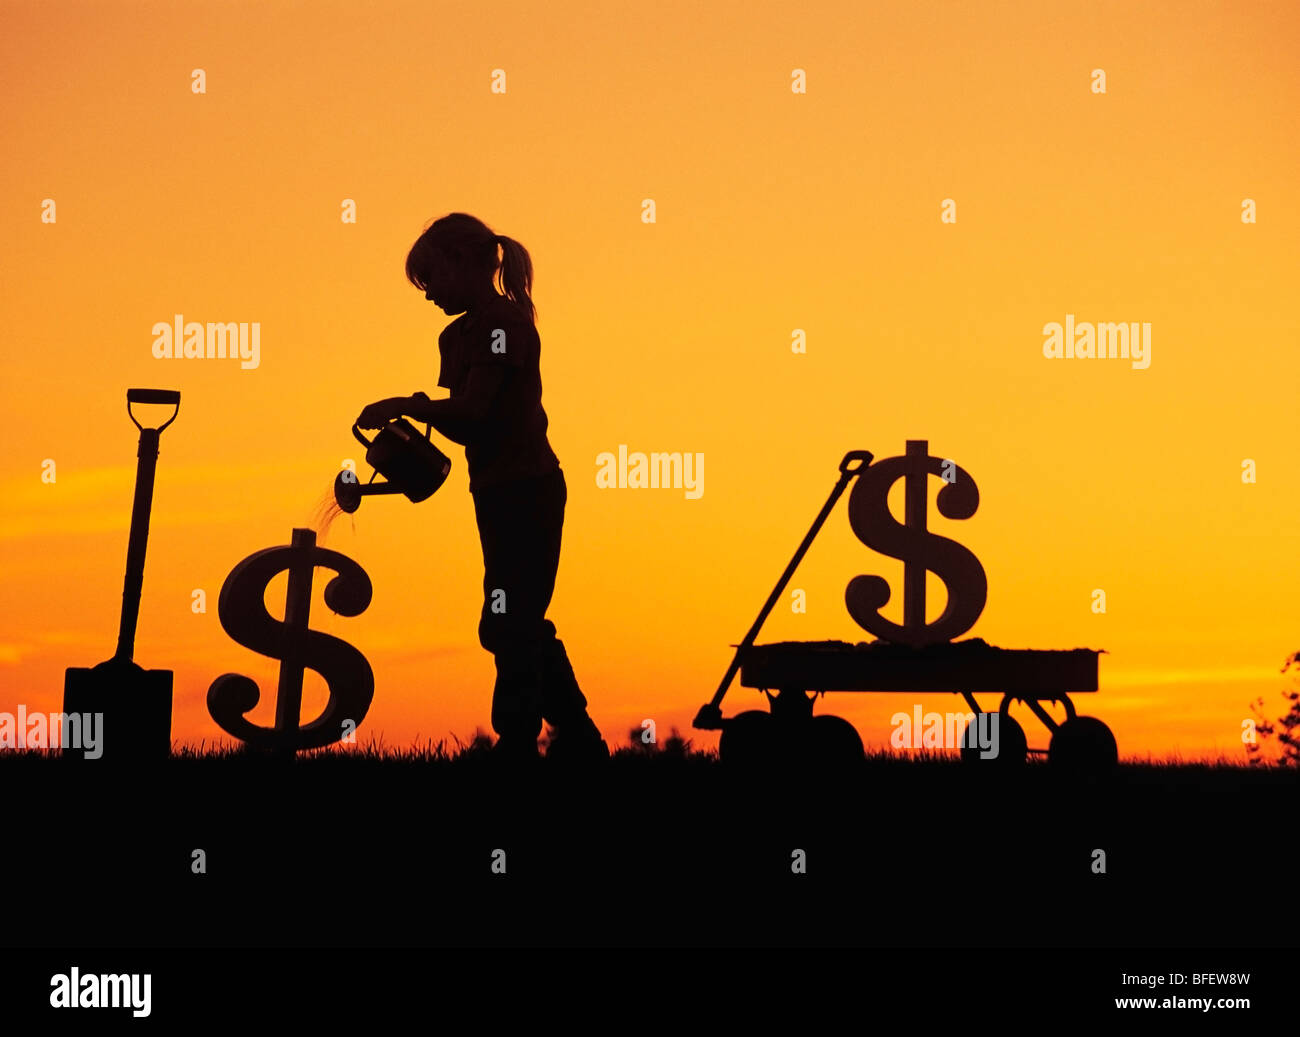 Conceptual of a young girl watering a newly planted dollar sign near Winnipeg, Manitoba, Canada Stock Photo